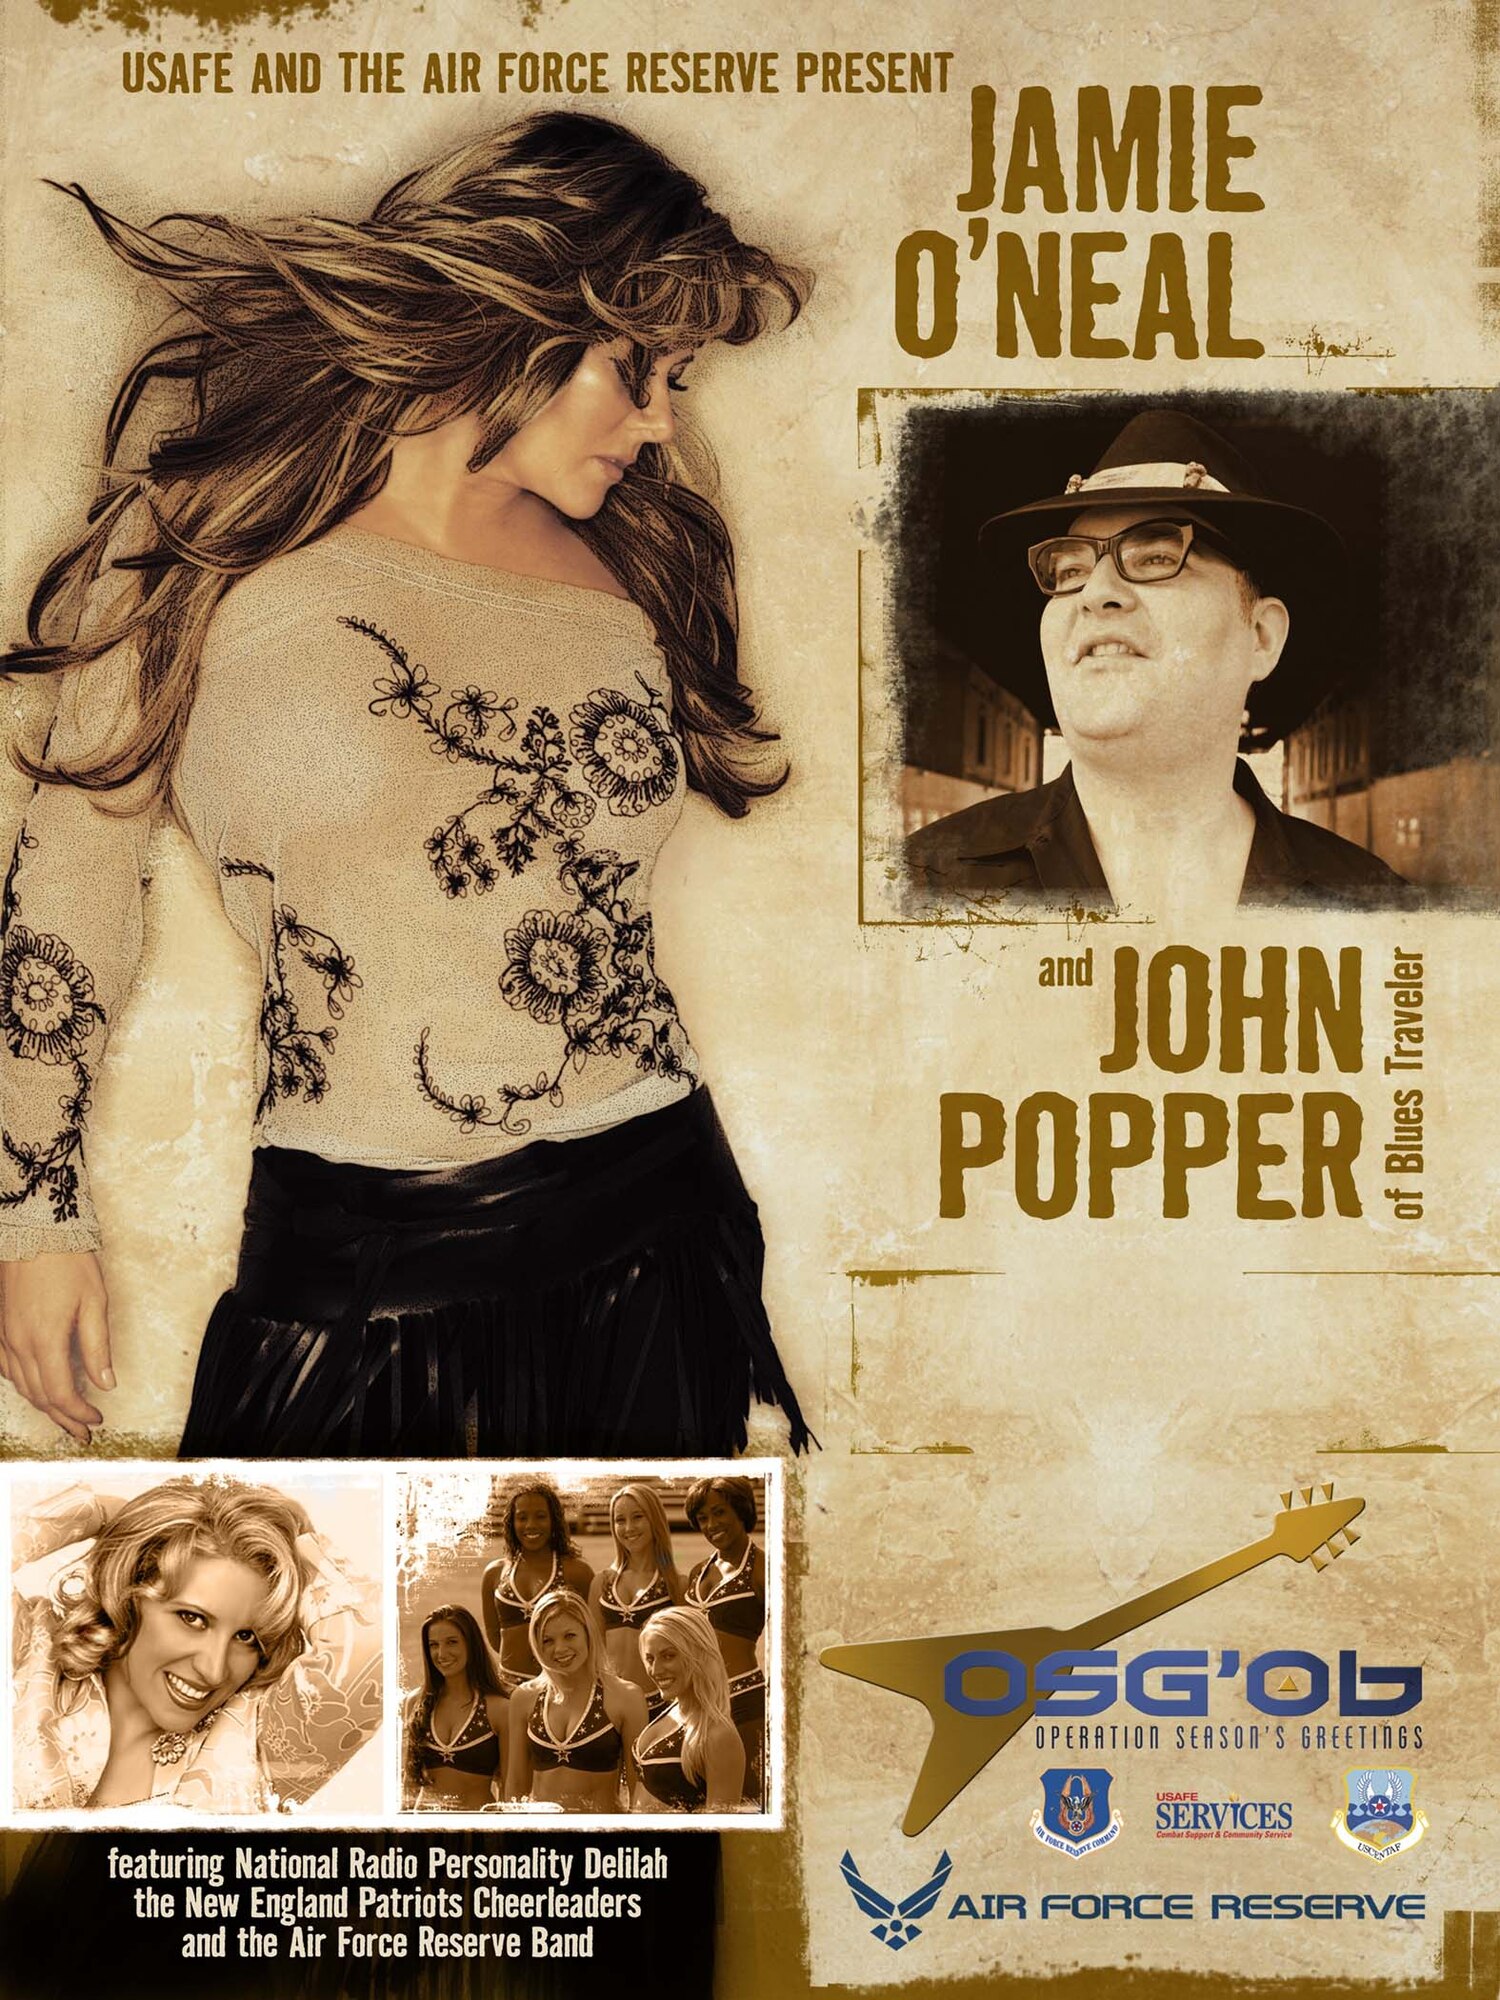 The United States Air Forces in Europe and Air Force Reserve present country singer Jamie O'Neal and John Popper of Blues Traveler.  The tour also features national radio personality Delilah, the New England Patriot Cheerleaders and the Band of the USAF Reserve.  